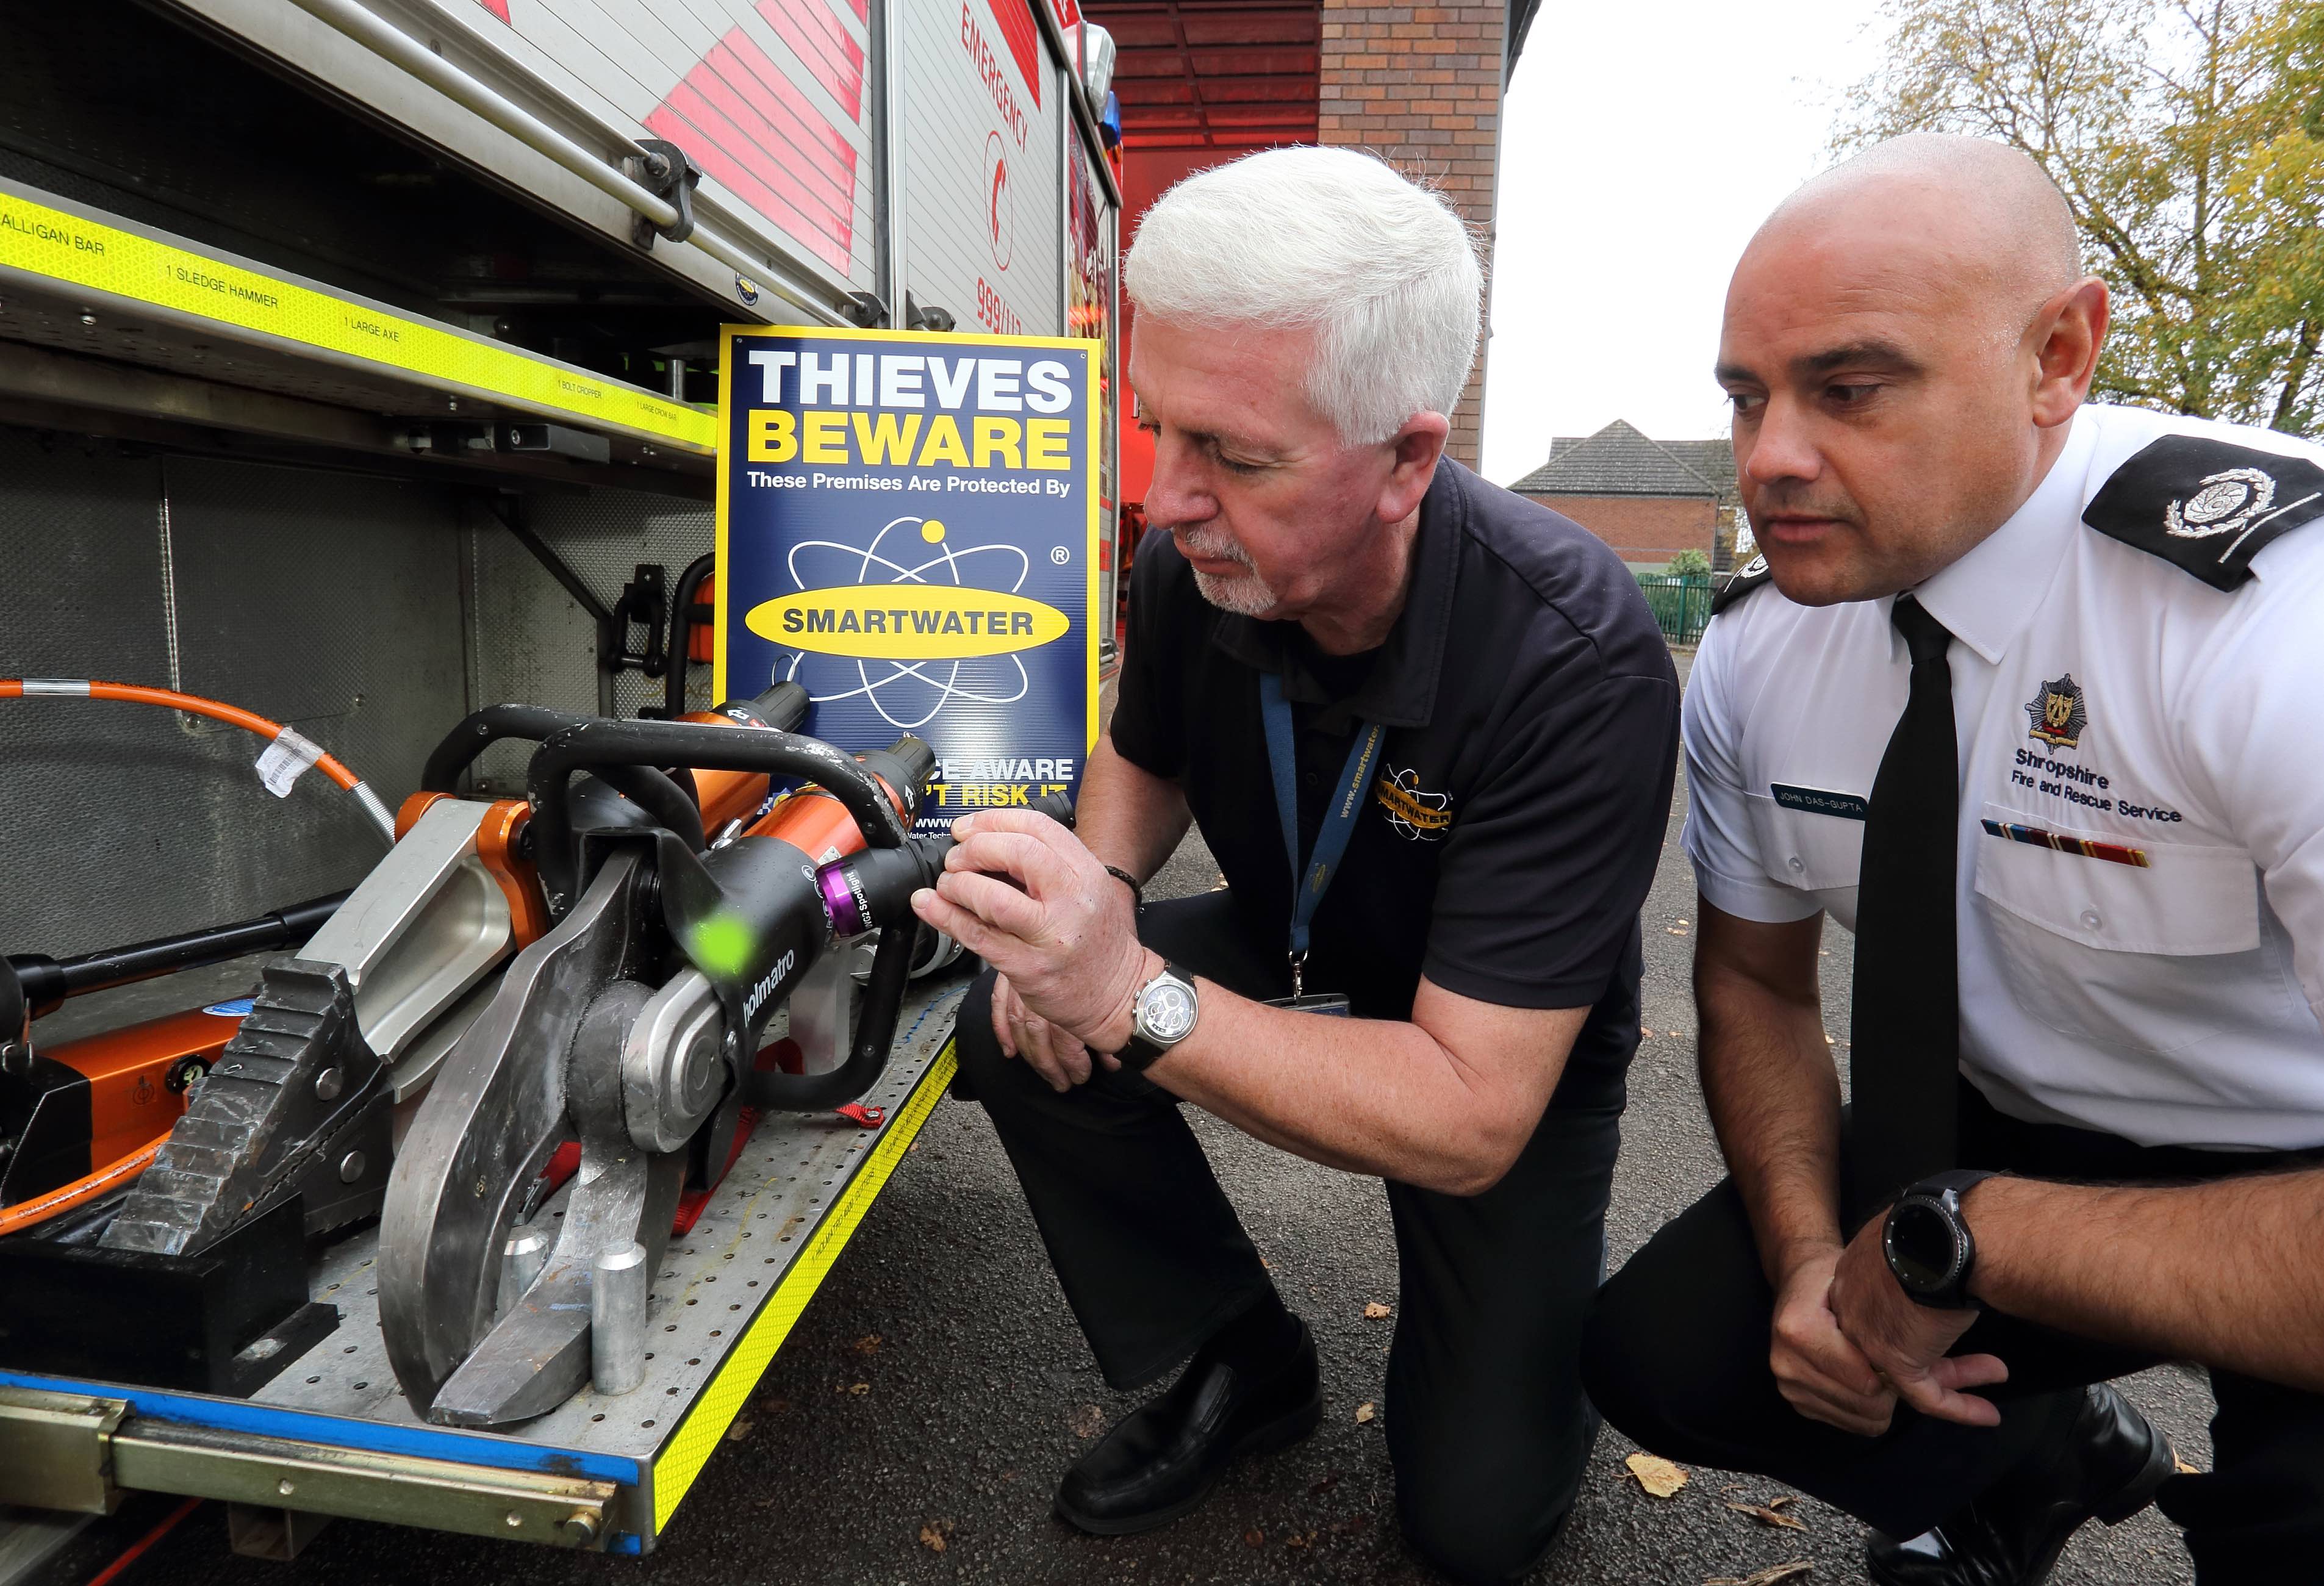 SmartWater’s Steve Mills, a former crime squad officer, shines an ultra violet light to identify stolen equipment and entrap thieves with Area Manager John Das Gupta and Andy Bevon (left), of Shropshire Fire and Rescue Service, at the scene of a “first ever” crime at Albrighton Fire Station.